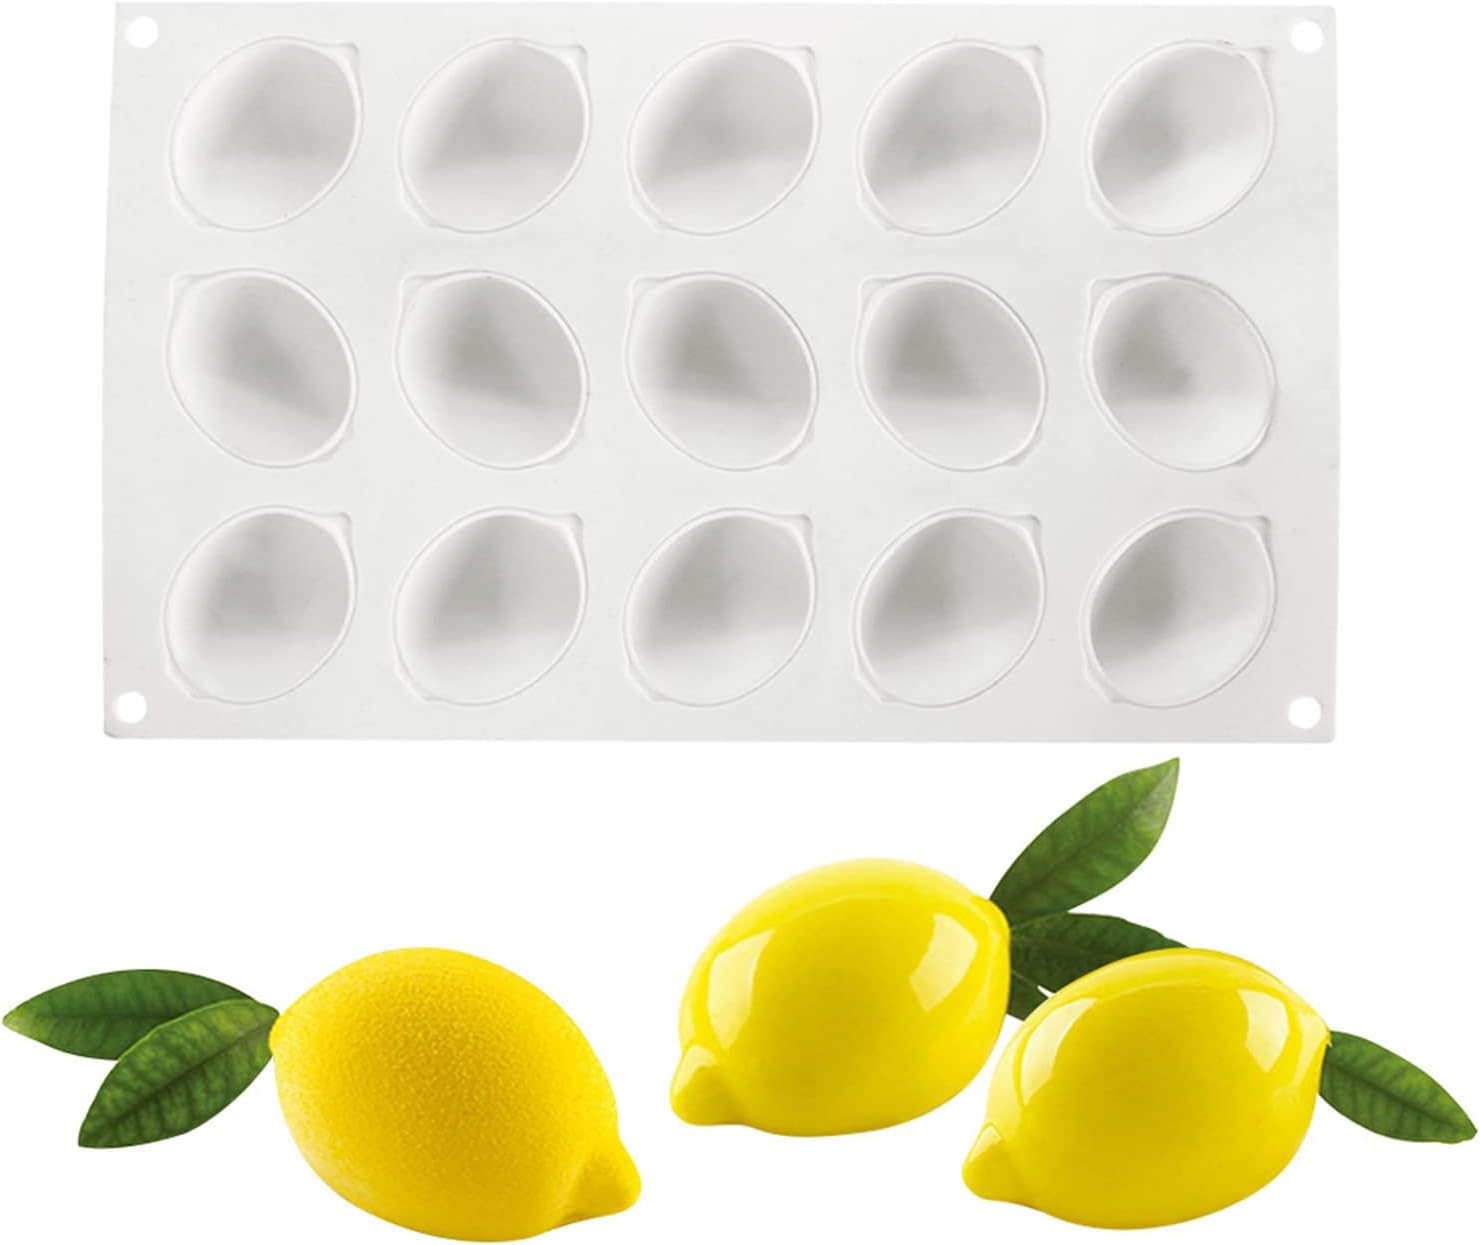 15 Holes Lemon Dessert Mould Lemon Baked Goods Mould Silicone Cake Mould Lemon for Muffins, Cupcakes, Cakes, Pudding, Ice Cubes and Jelly, Bread Baking Mould, 3D Baking Moulds DIY Mould (Lemon)